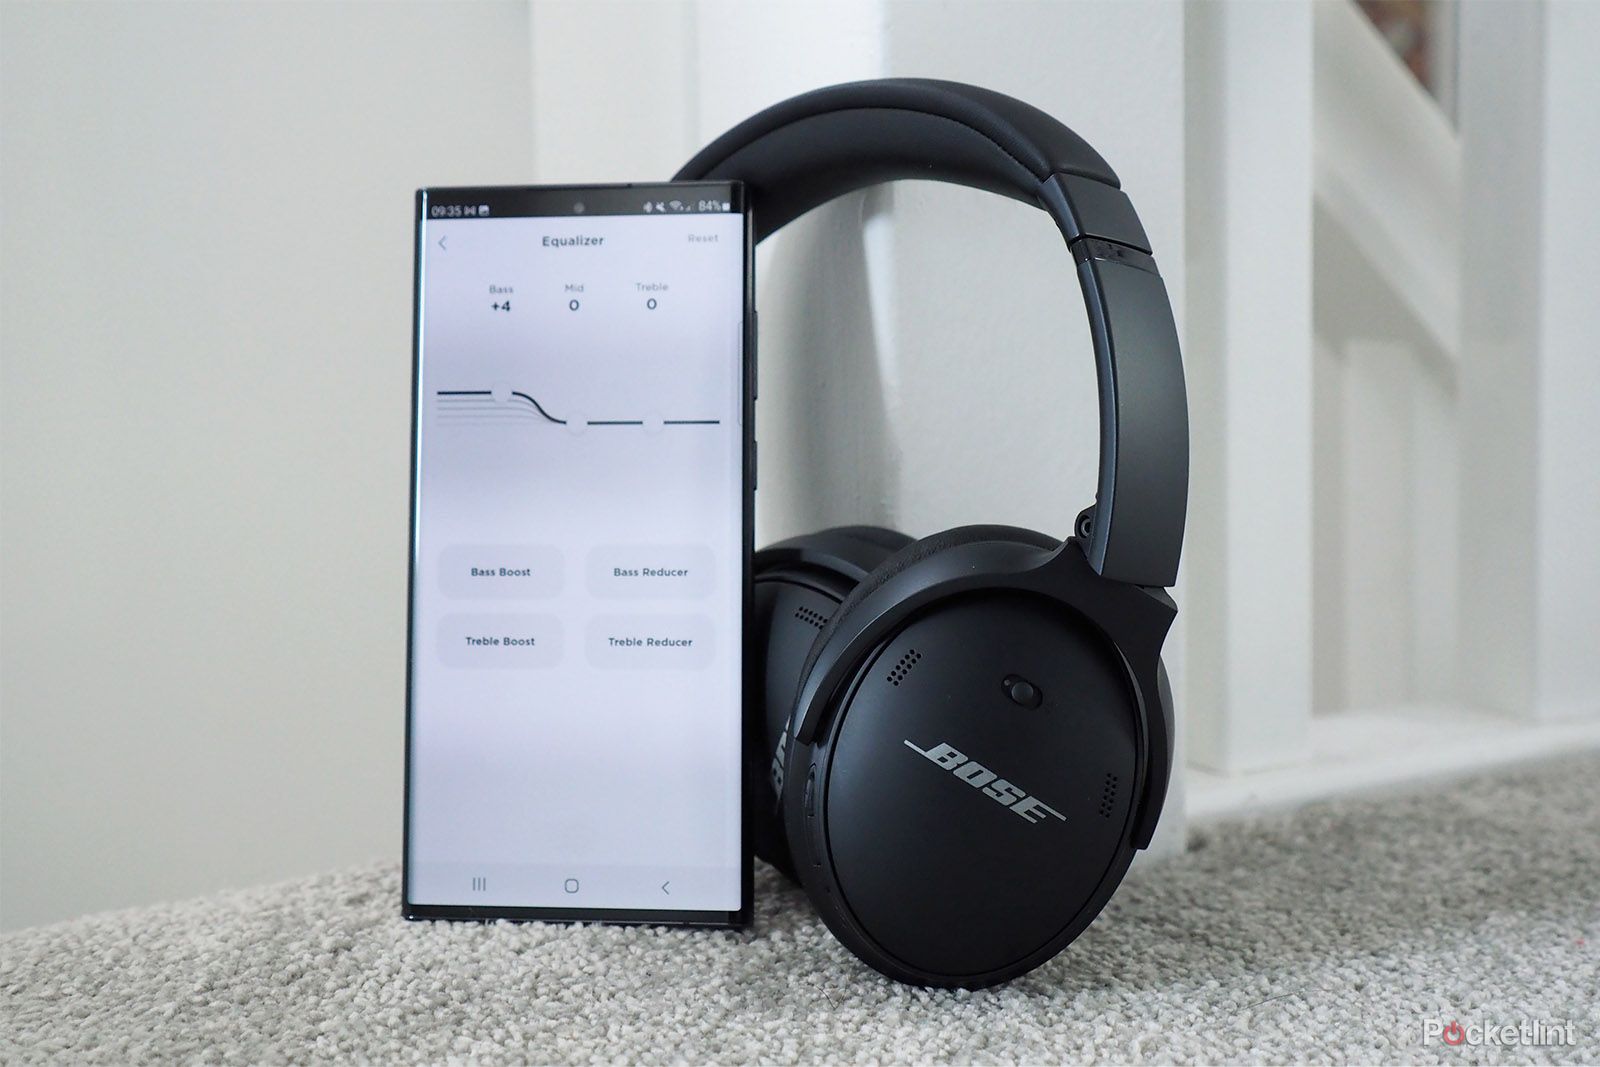 9 Reasons To Buy Bose Qc45 Headphones Today - History-Computer